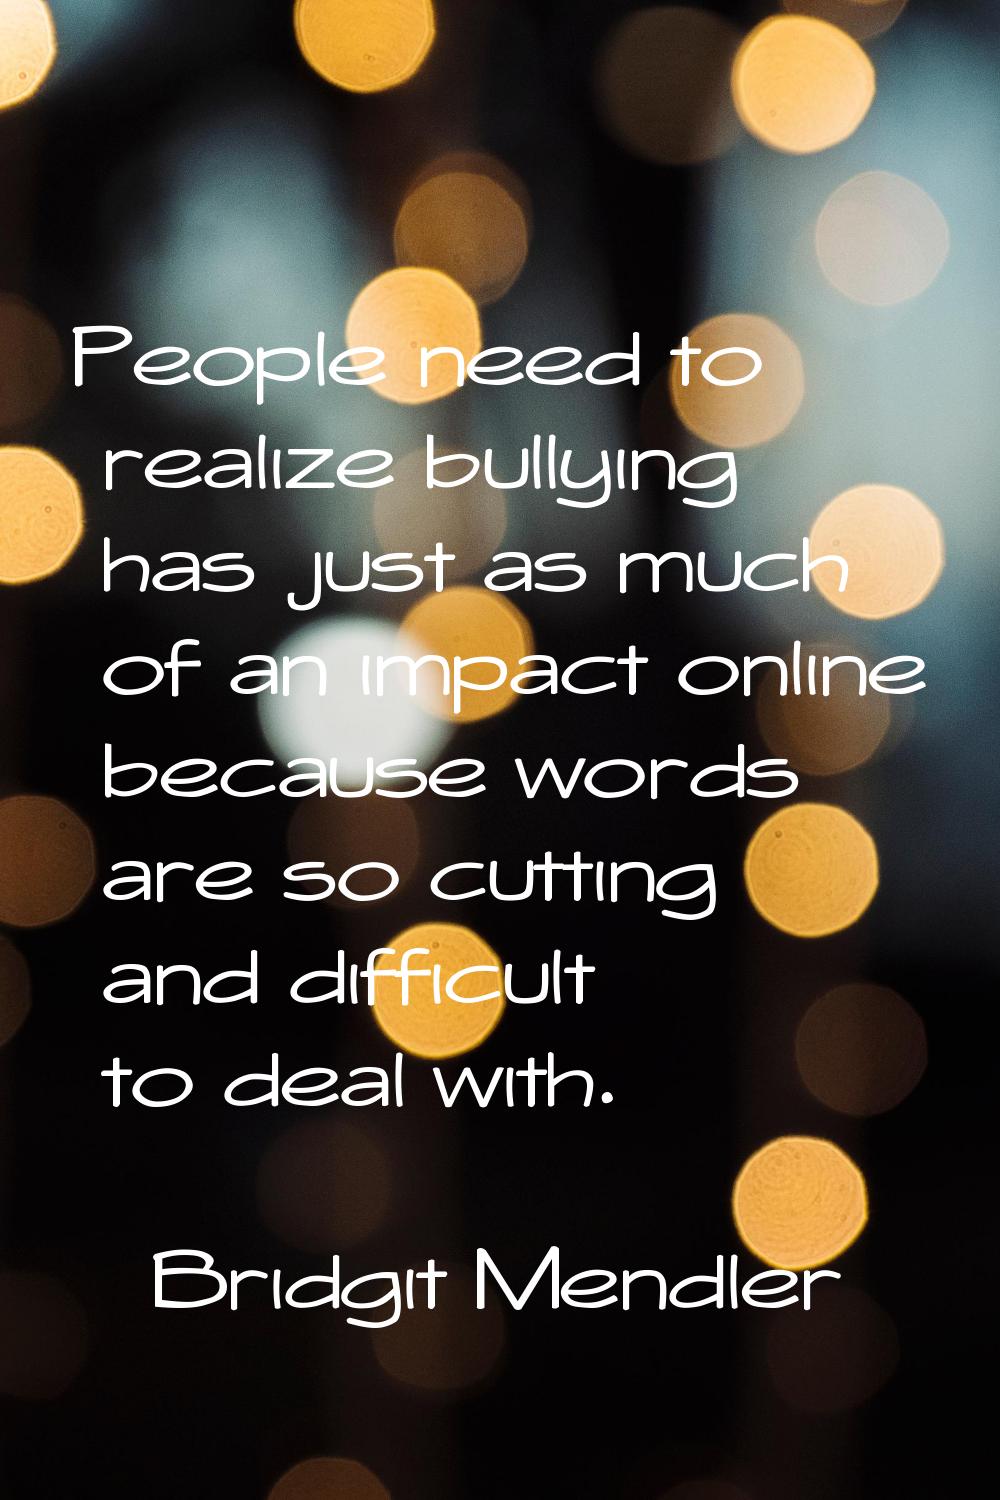 People need to realize bullying has just as much of an impact online because words are so cutting a